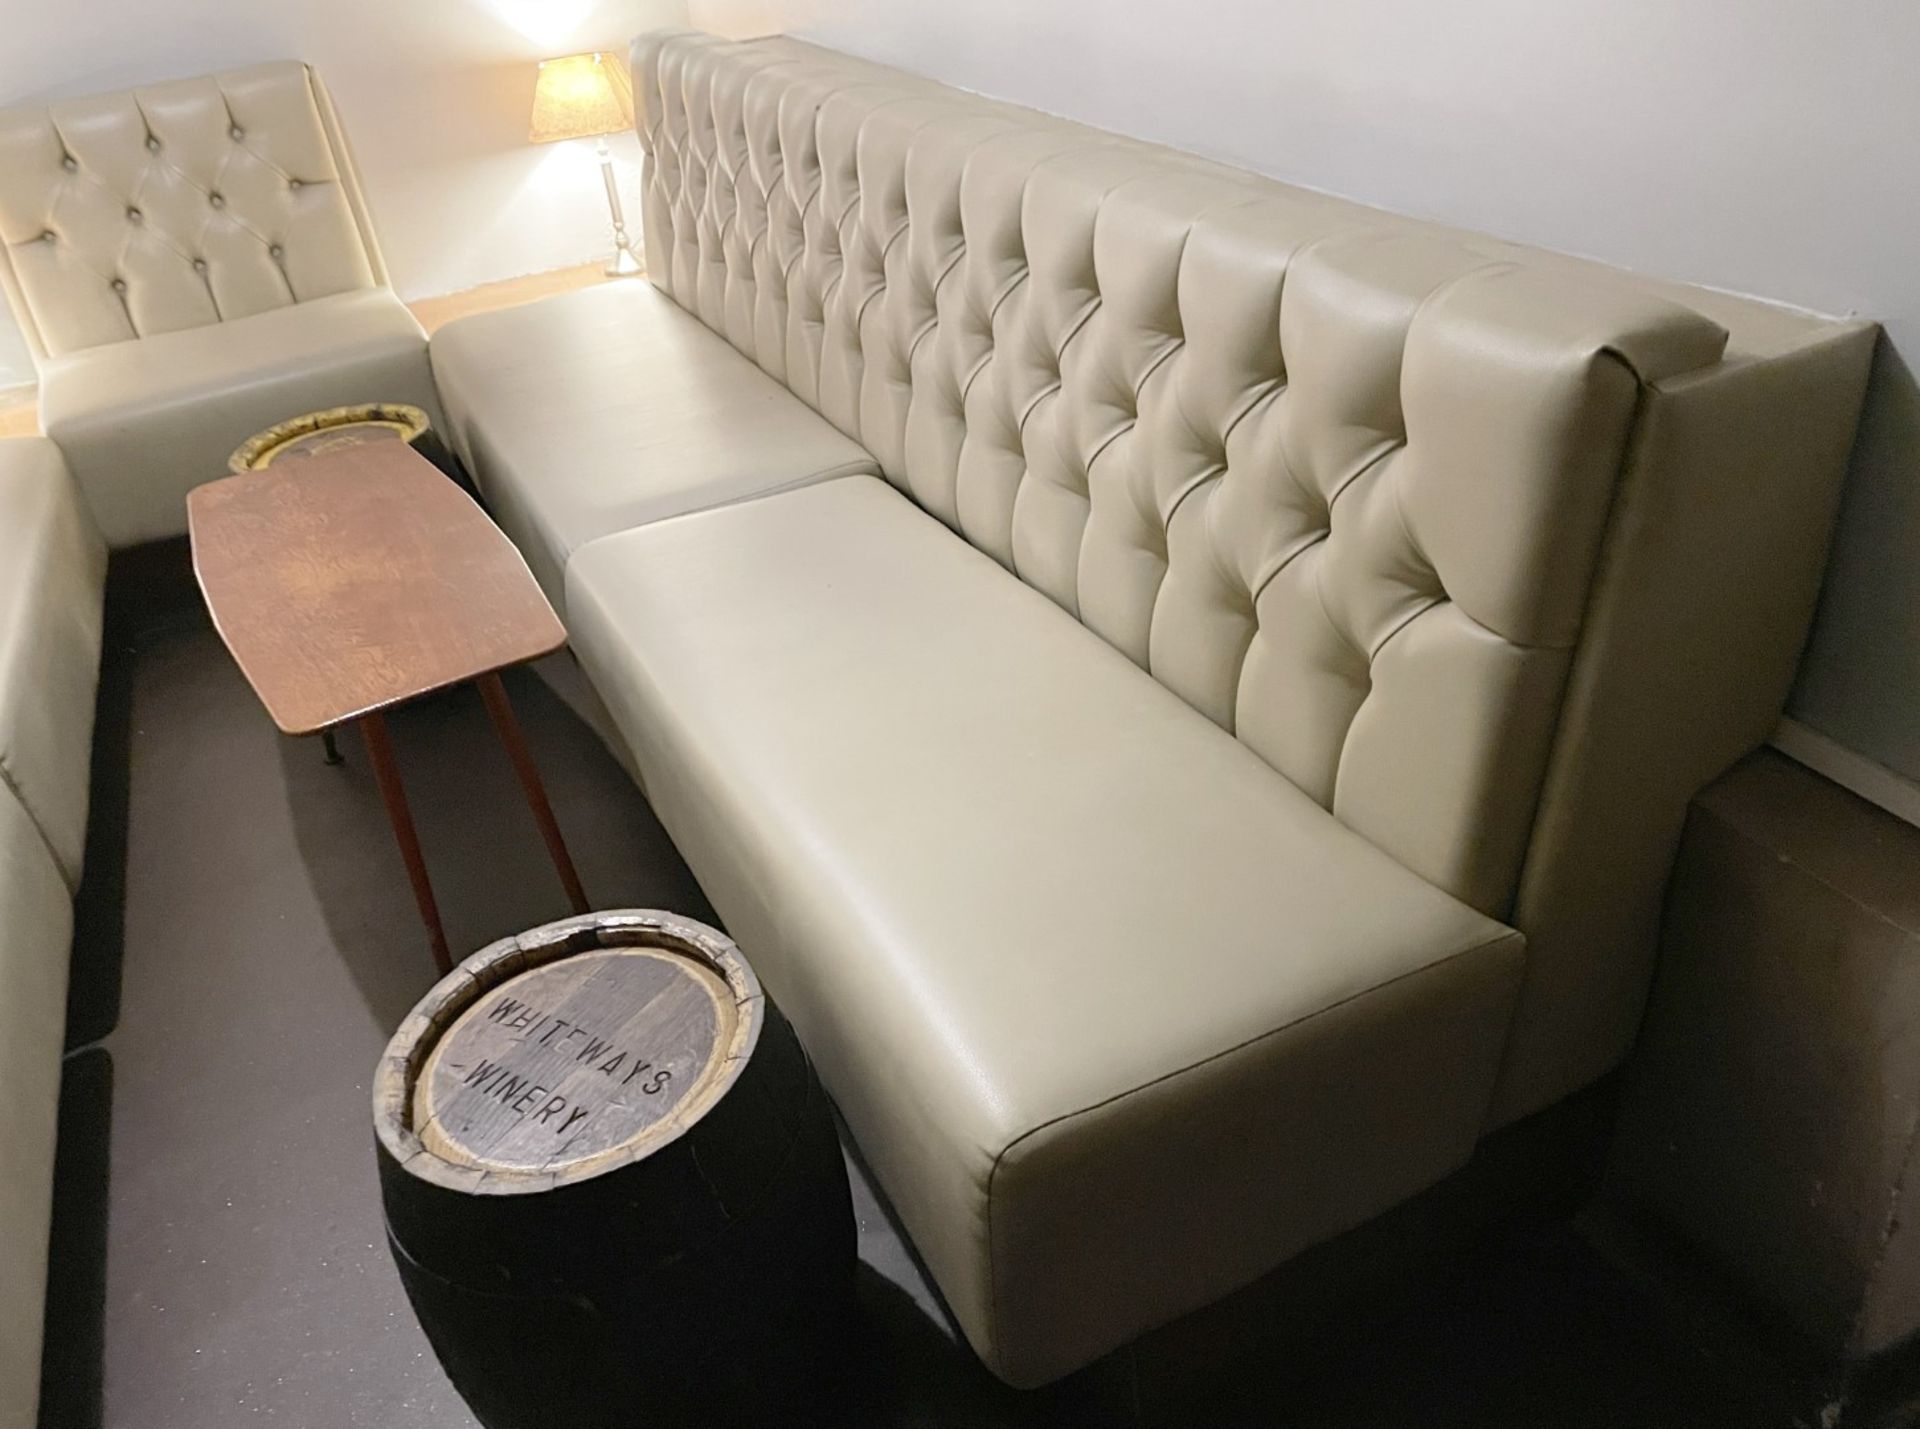 5 x Sections of Button Back Banquette Booth Seating Upholstered in a Cream Faux Leather - Image 2 of 6